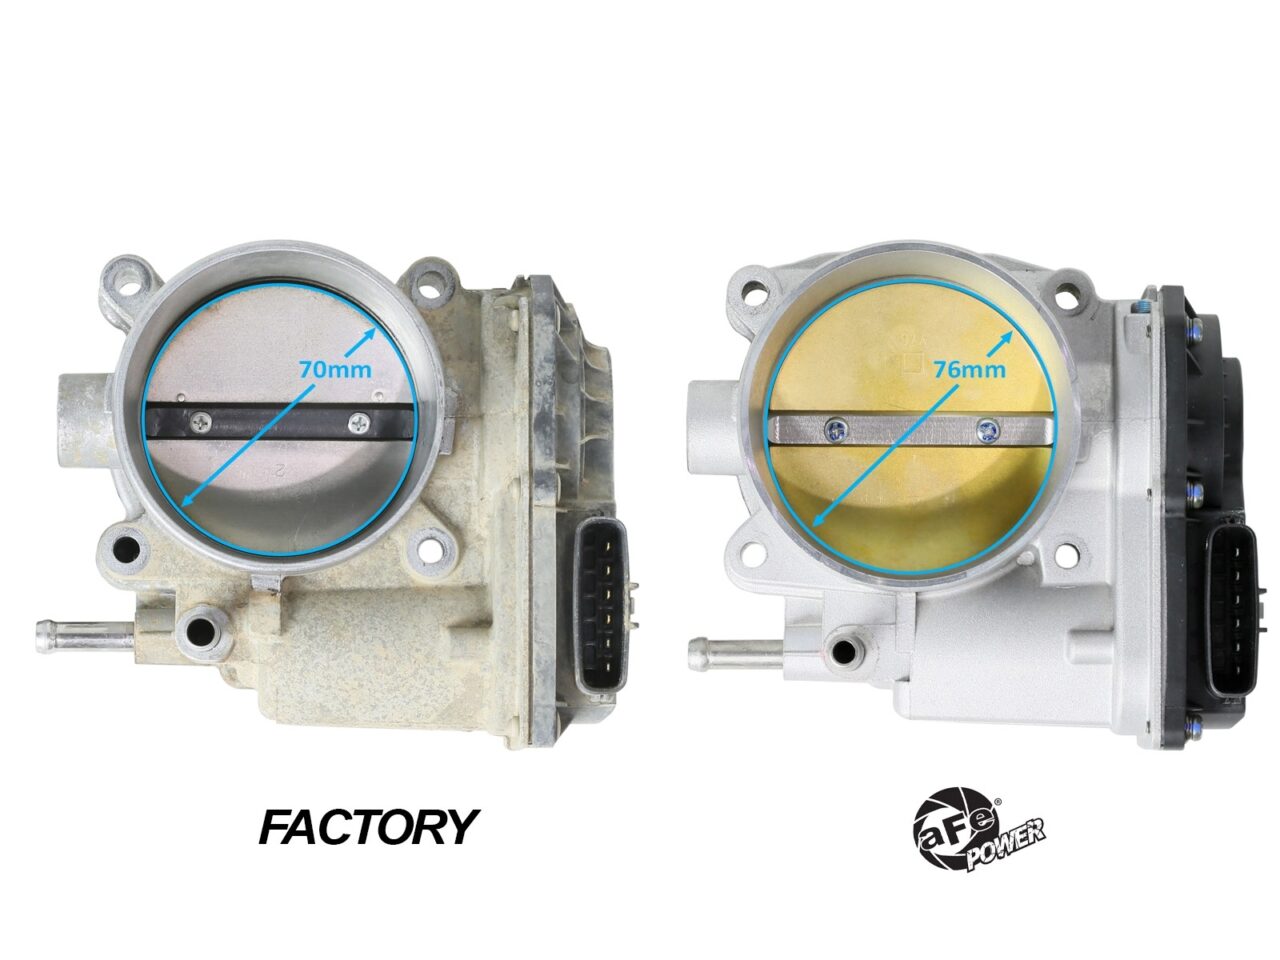 Comparison of 70mm Factory Throttle body on left to 76mm aftermarket aFe POWER throttle body on right showing the aftermarket 76mm bore diameter is bigger for more airflow